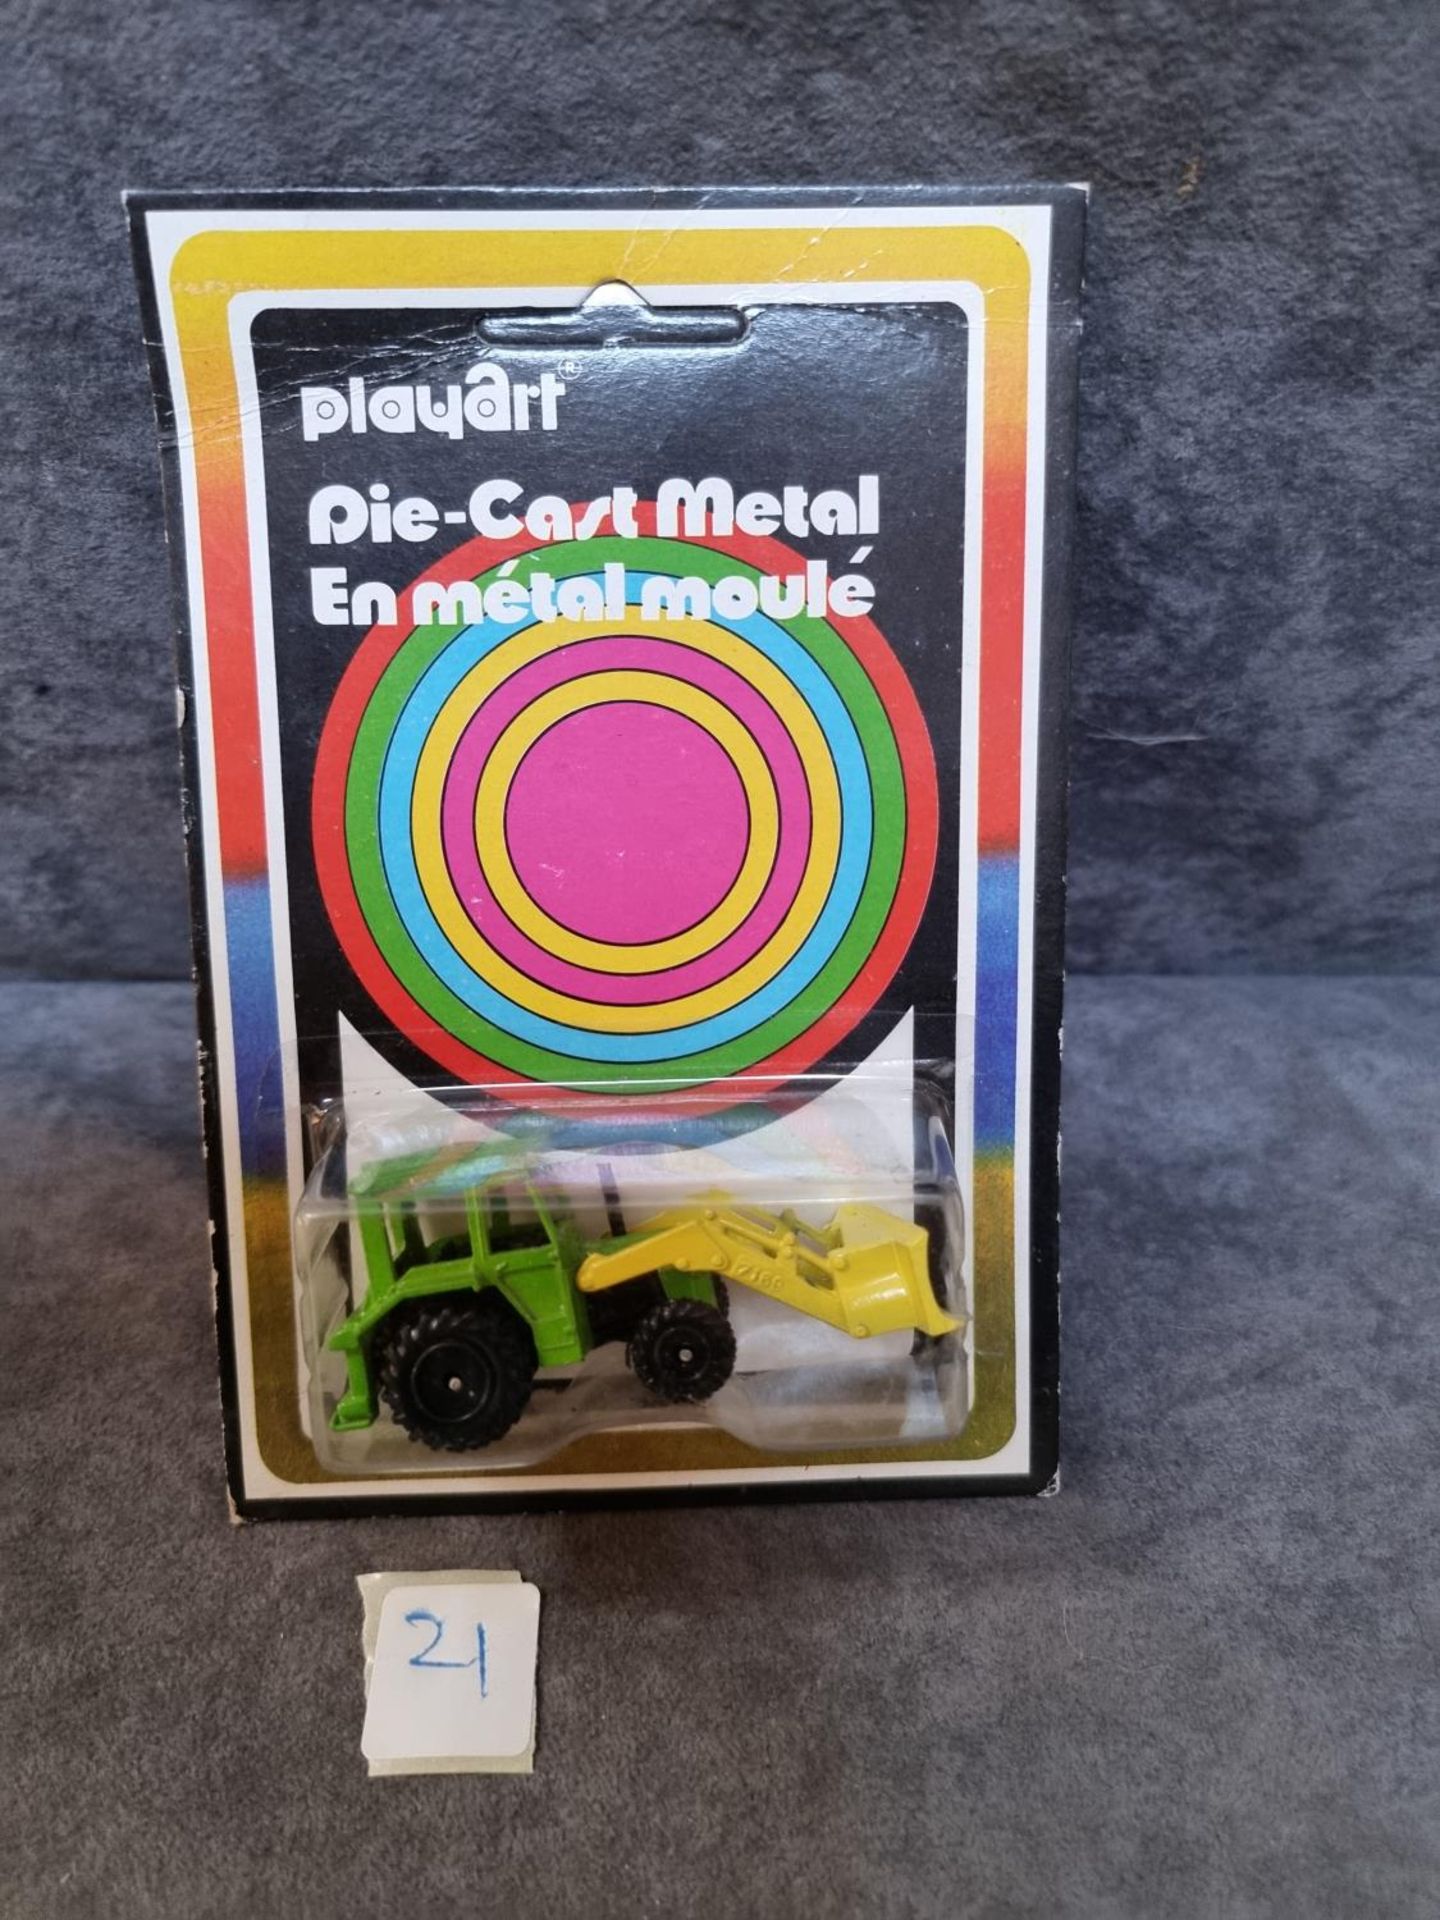 Playart Diecast Metal #7169 Tractor With Angeldozer On Card Playart Was A Toy Company Owned By